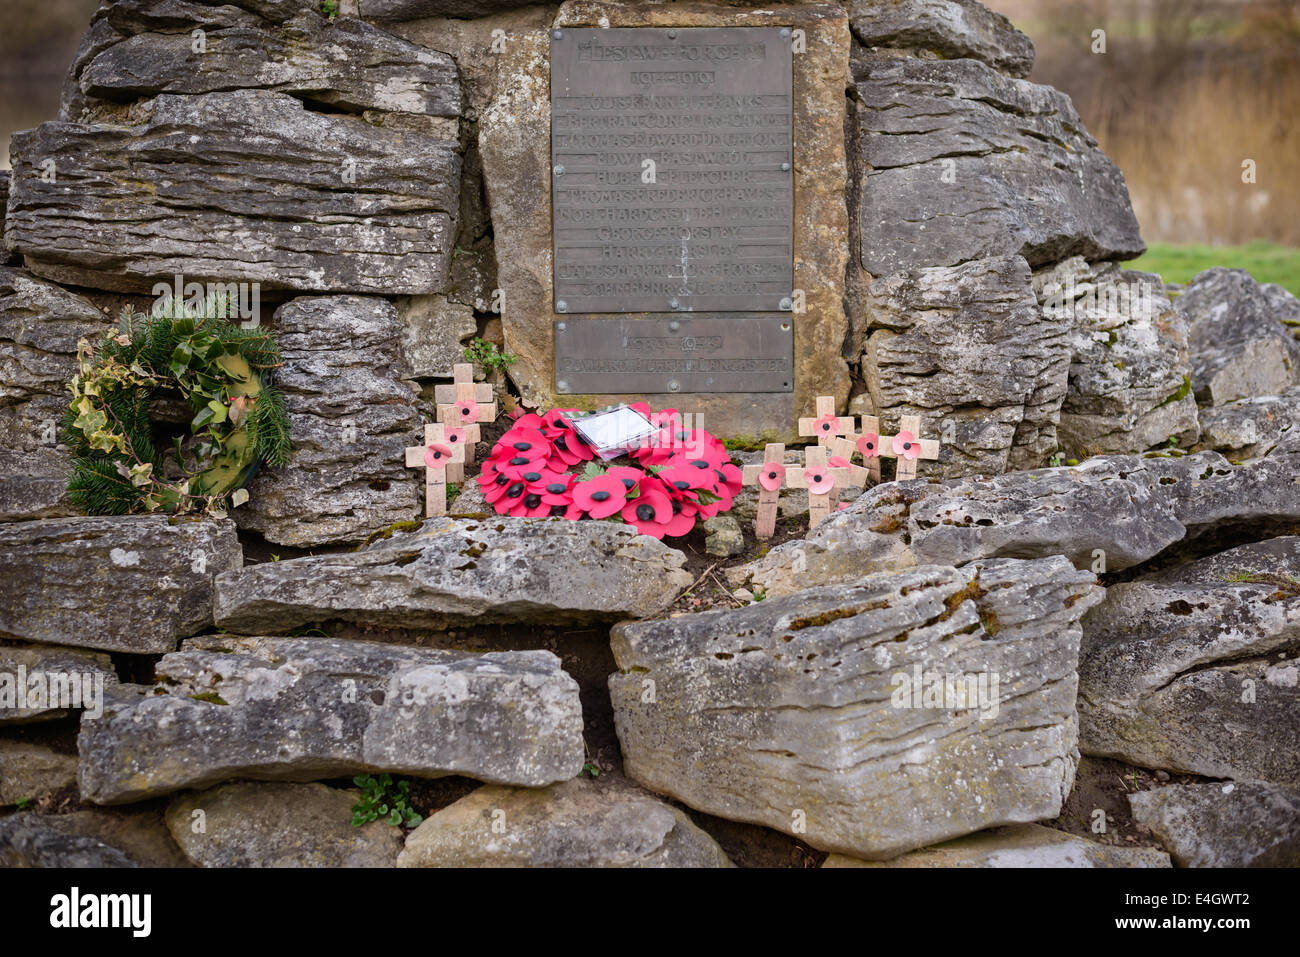 A metal War Memorial with poppies and wooden crosses, in Poppleton, near York, UK. Stock Photo